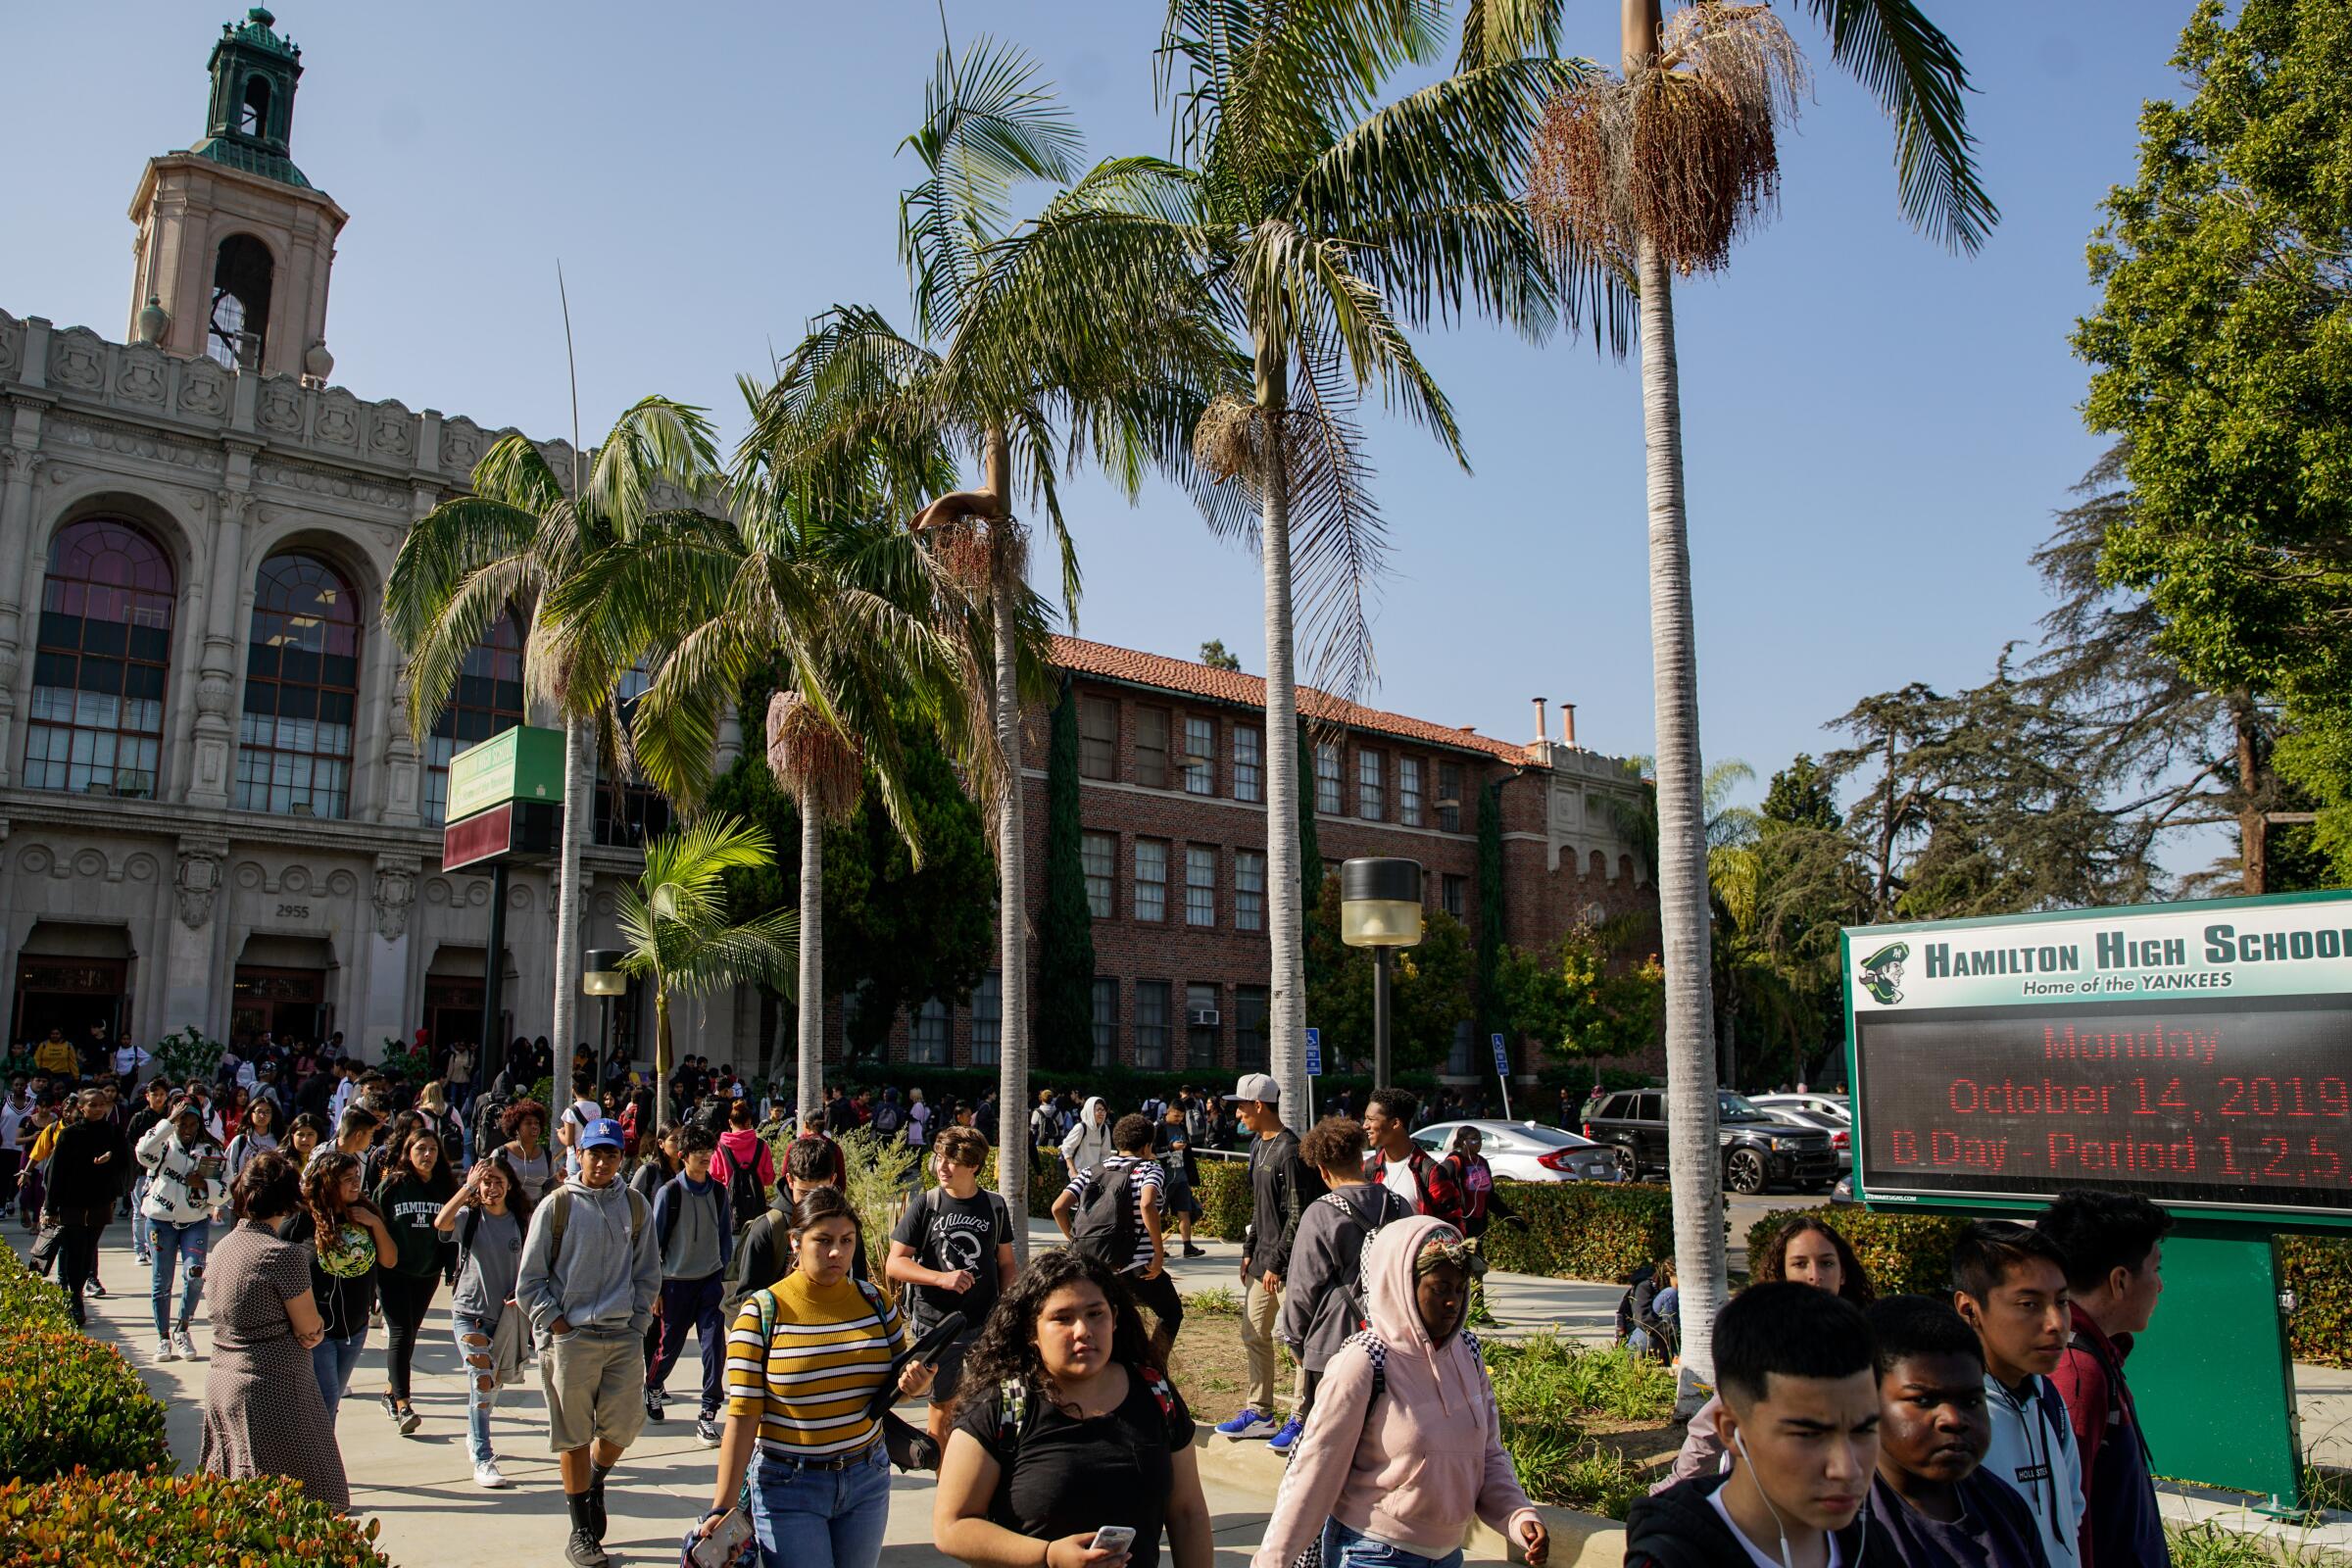 Students file out from Hamilton High School, an L.A. Unified campus with multiple magnet programs.